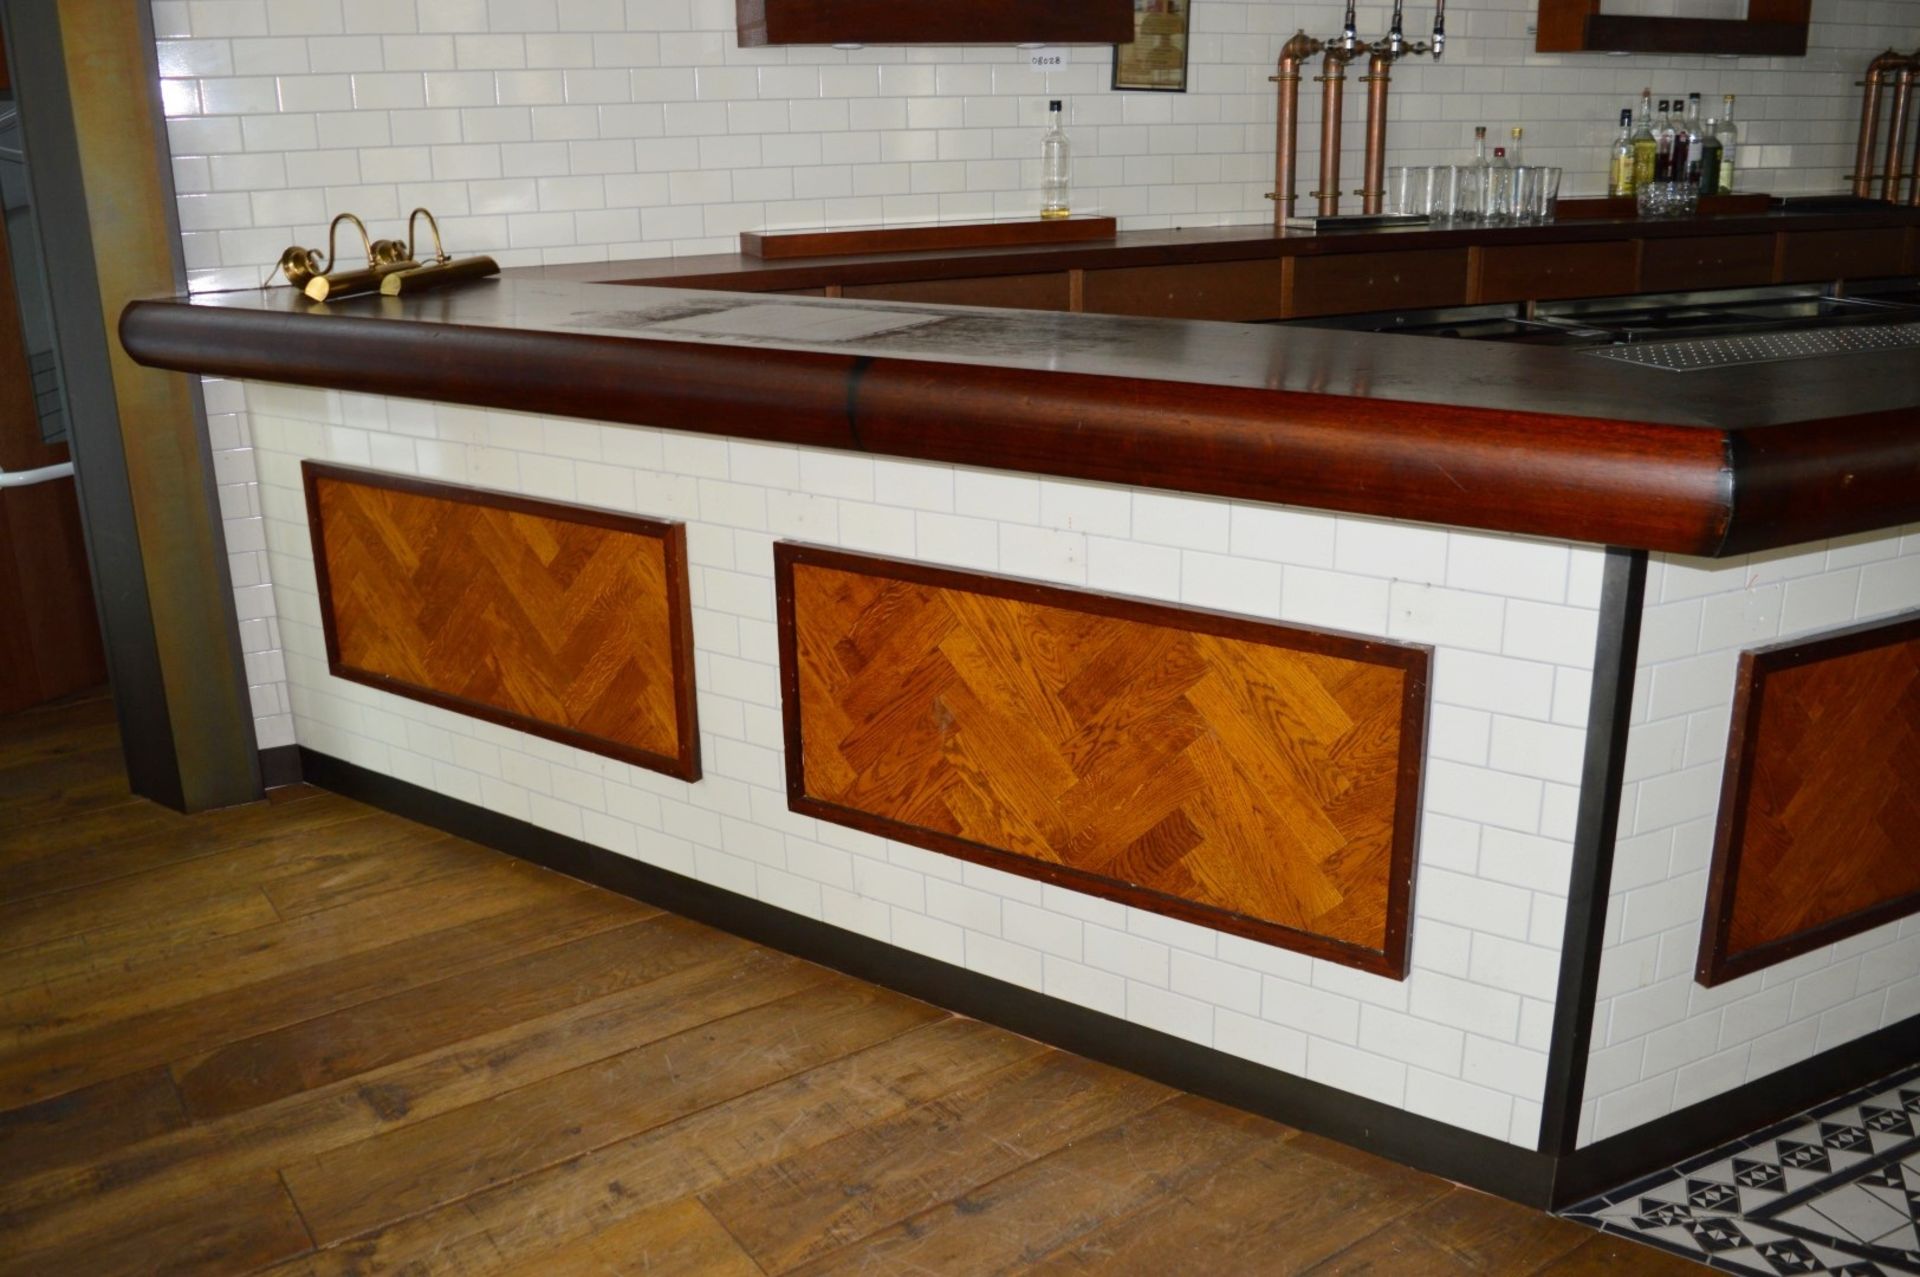 1 x Large Pub / Restuarant Bar With Tiled Front and Framed Parquet Flooring Design - Also Includes - Image 7 of 25